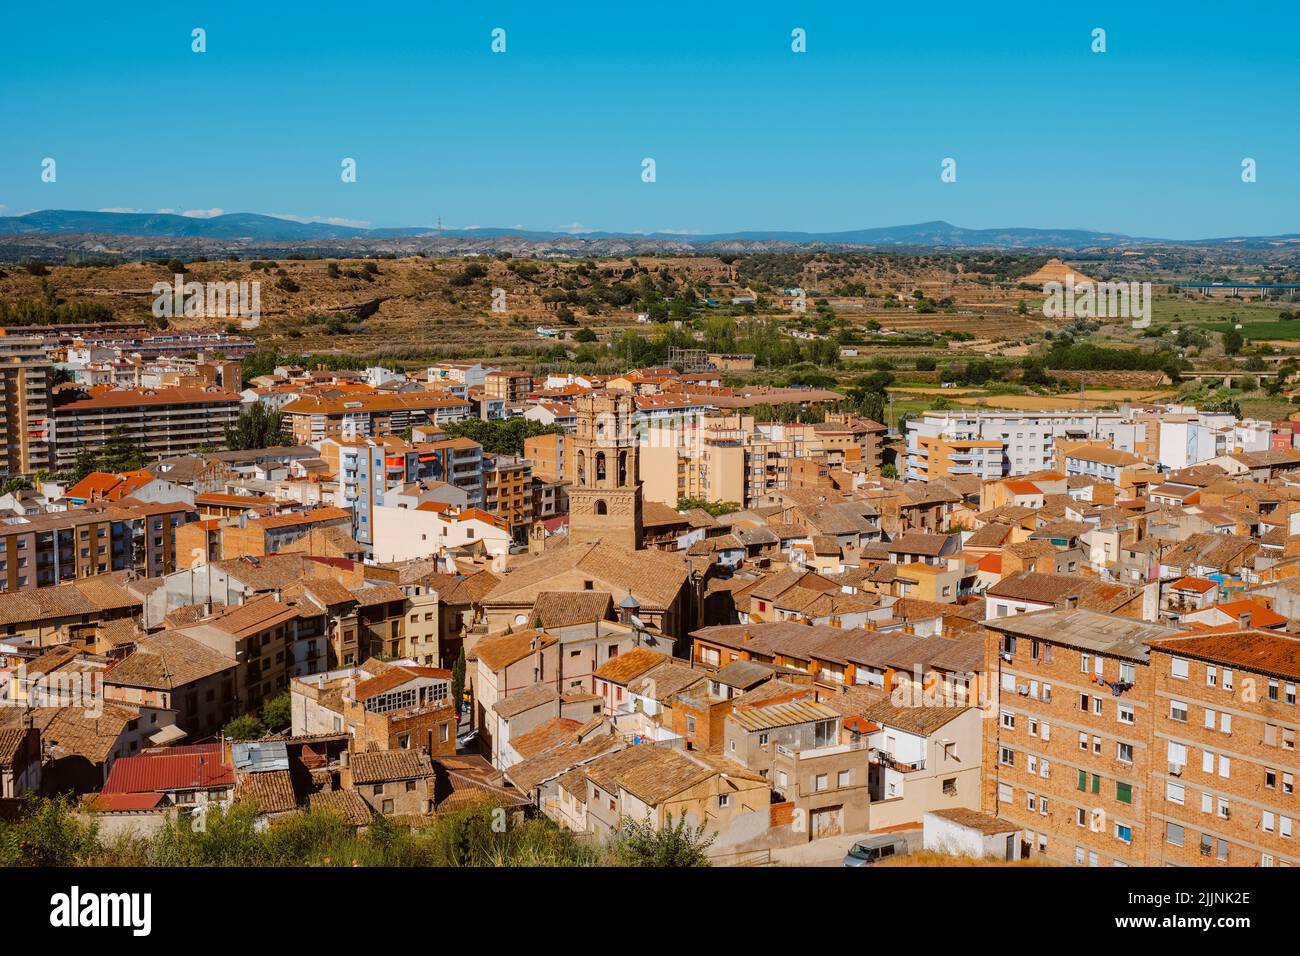 an aerial view of the old town of Monzon, in the Huesca province of Aragon, Spain, highlighting the bell tower of the Cathedral of Santa Maria del Rom Stock Photo